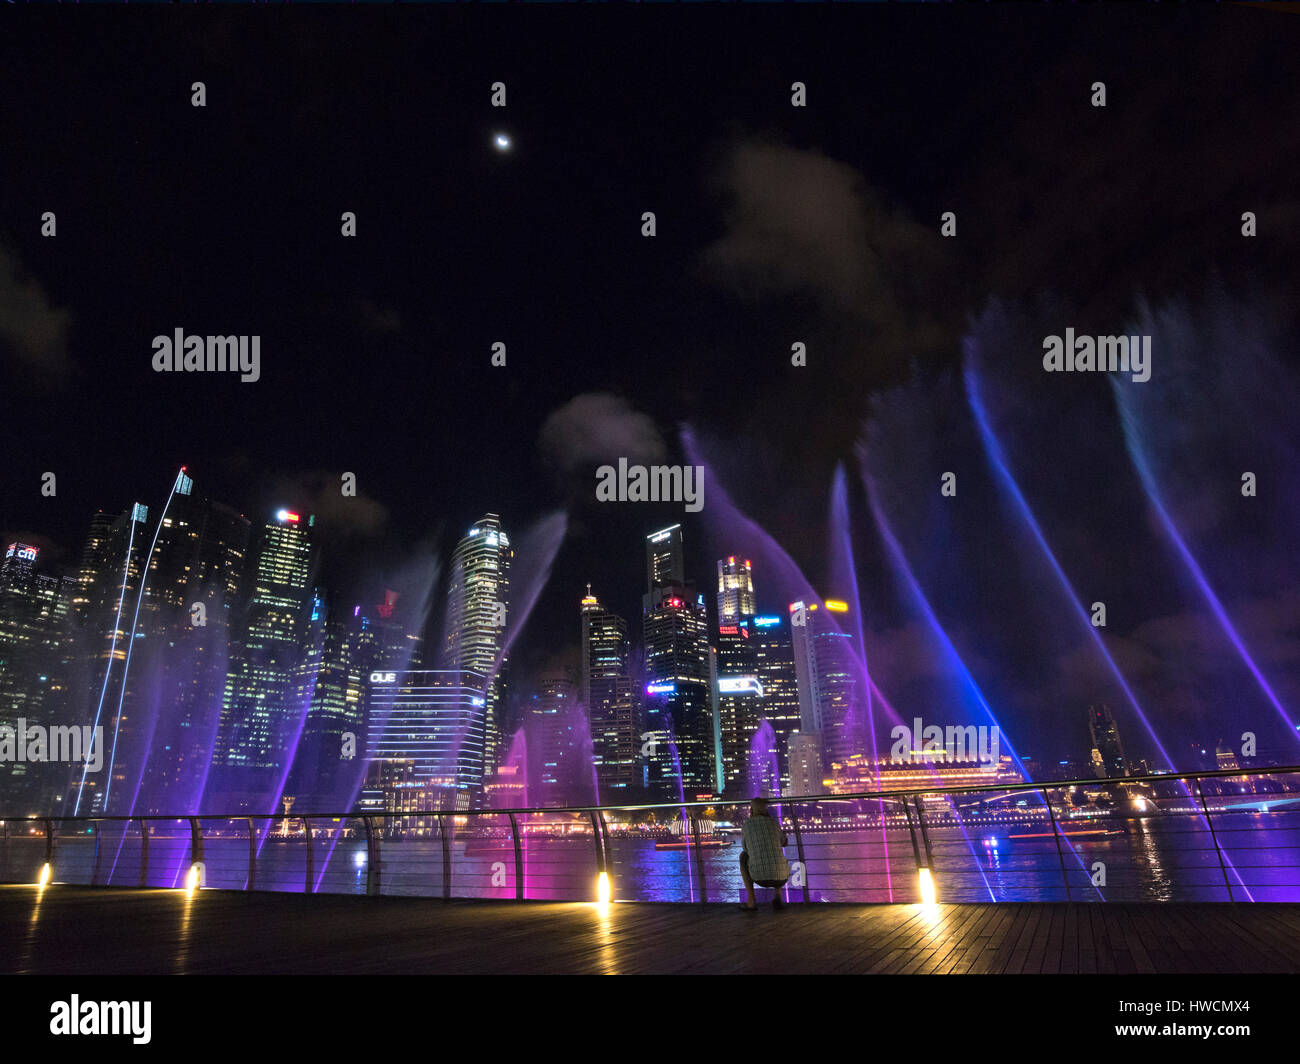 Horizontal view of the Wonder Full light and sound show at night in Singapore. Stock Photo